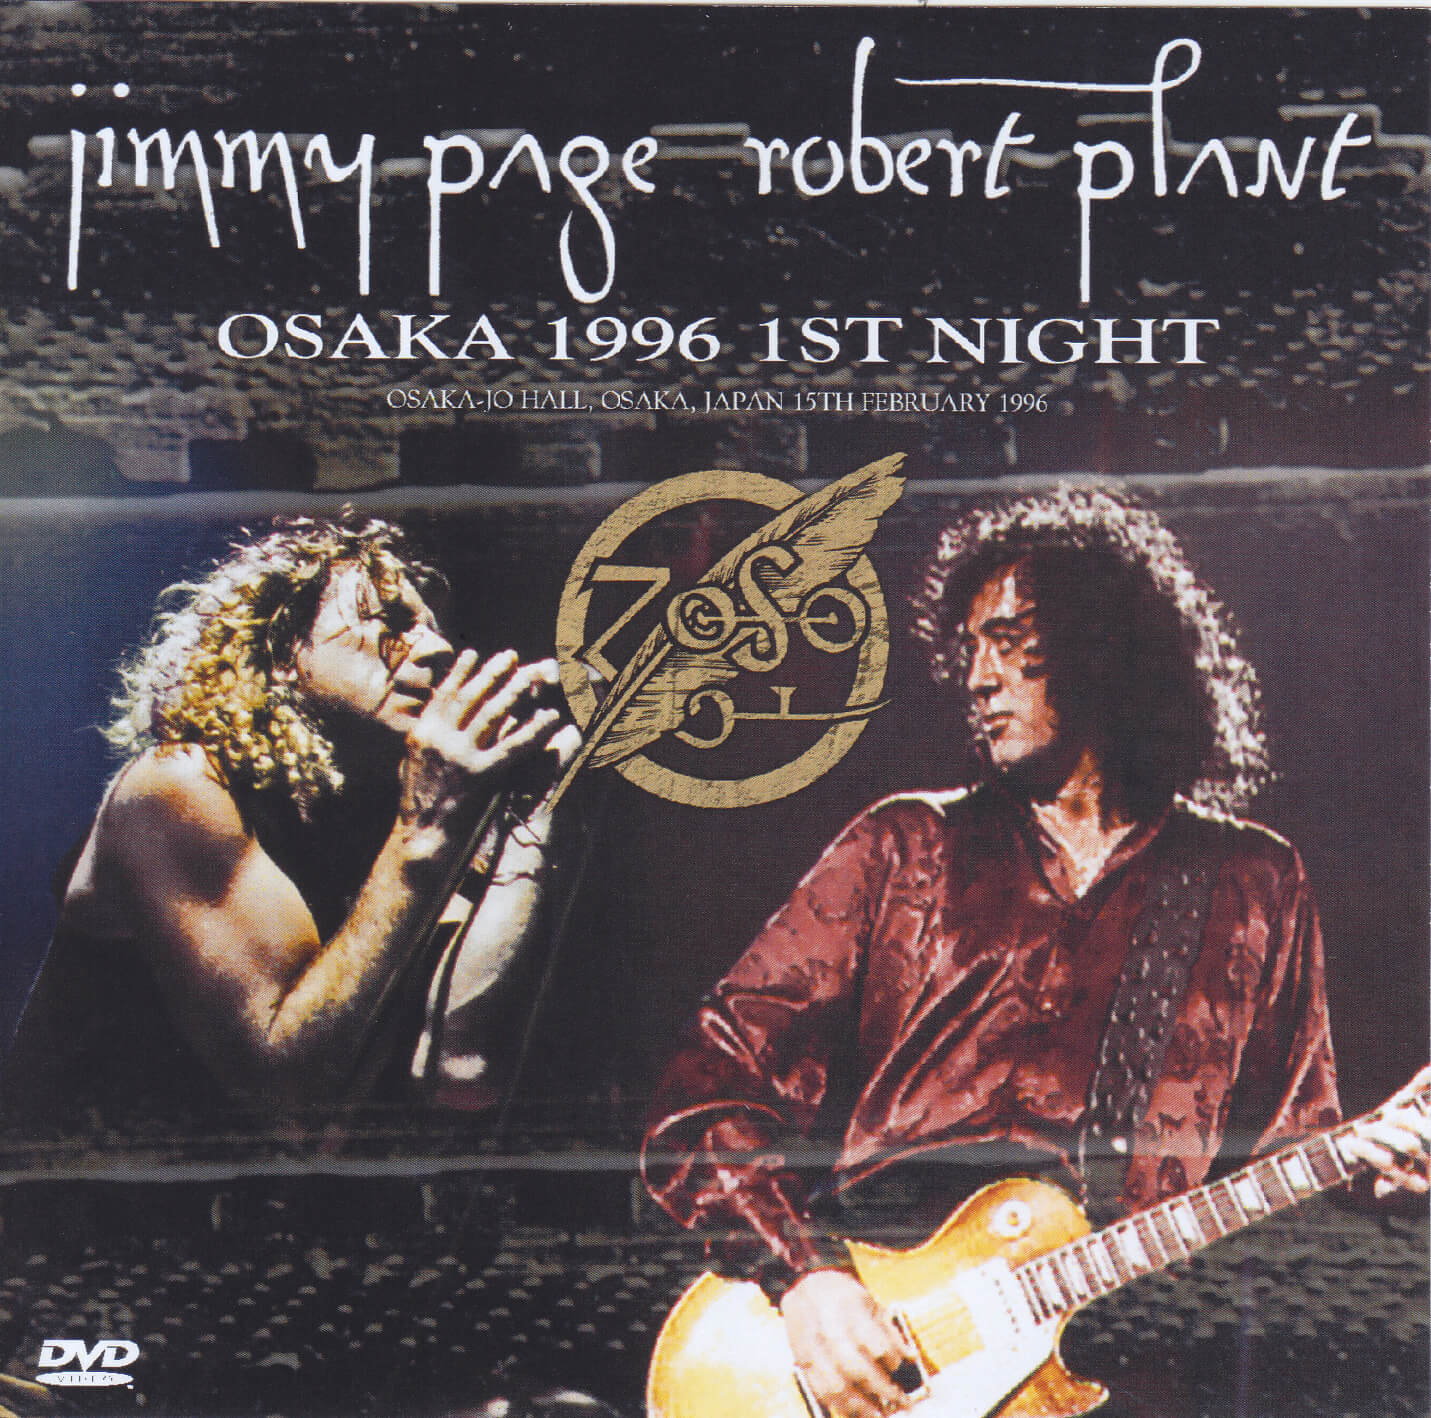 SBD！4CD！PAGE & PLANT/LIVE IN JAPAN 1996-